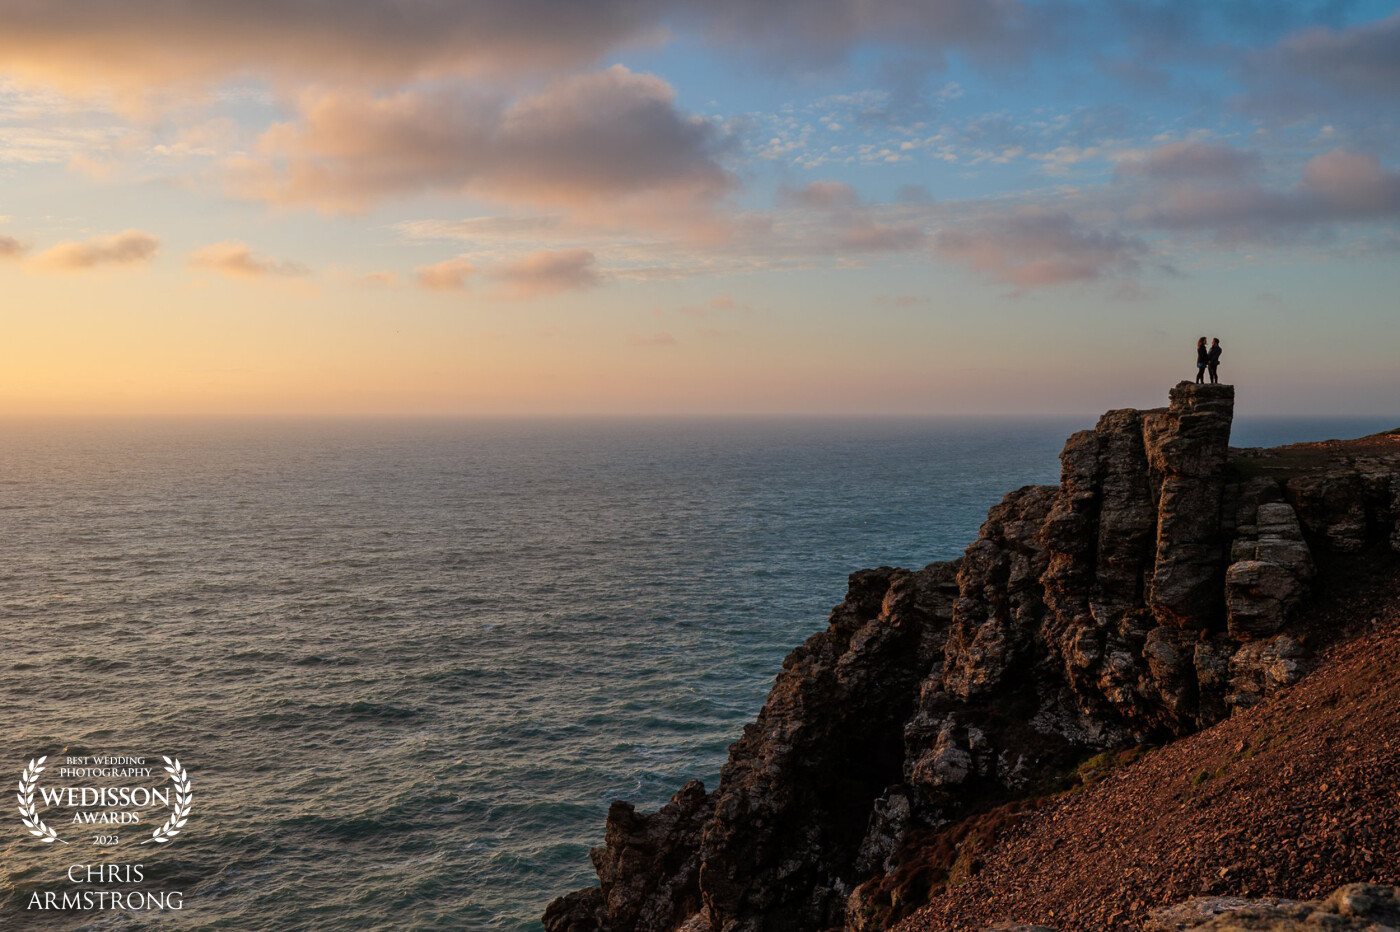 I met Elecia and Josh for their engagement shoot ahead of their autumn wedding at St Agnes in Cornwall. So we went for a nice sunset walk and luckily for me they were both fine with heights and a bit of exposed clifftop scrambling!